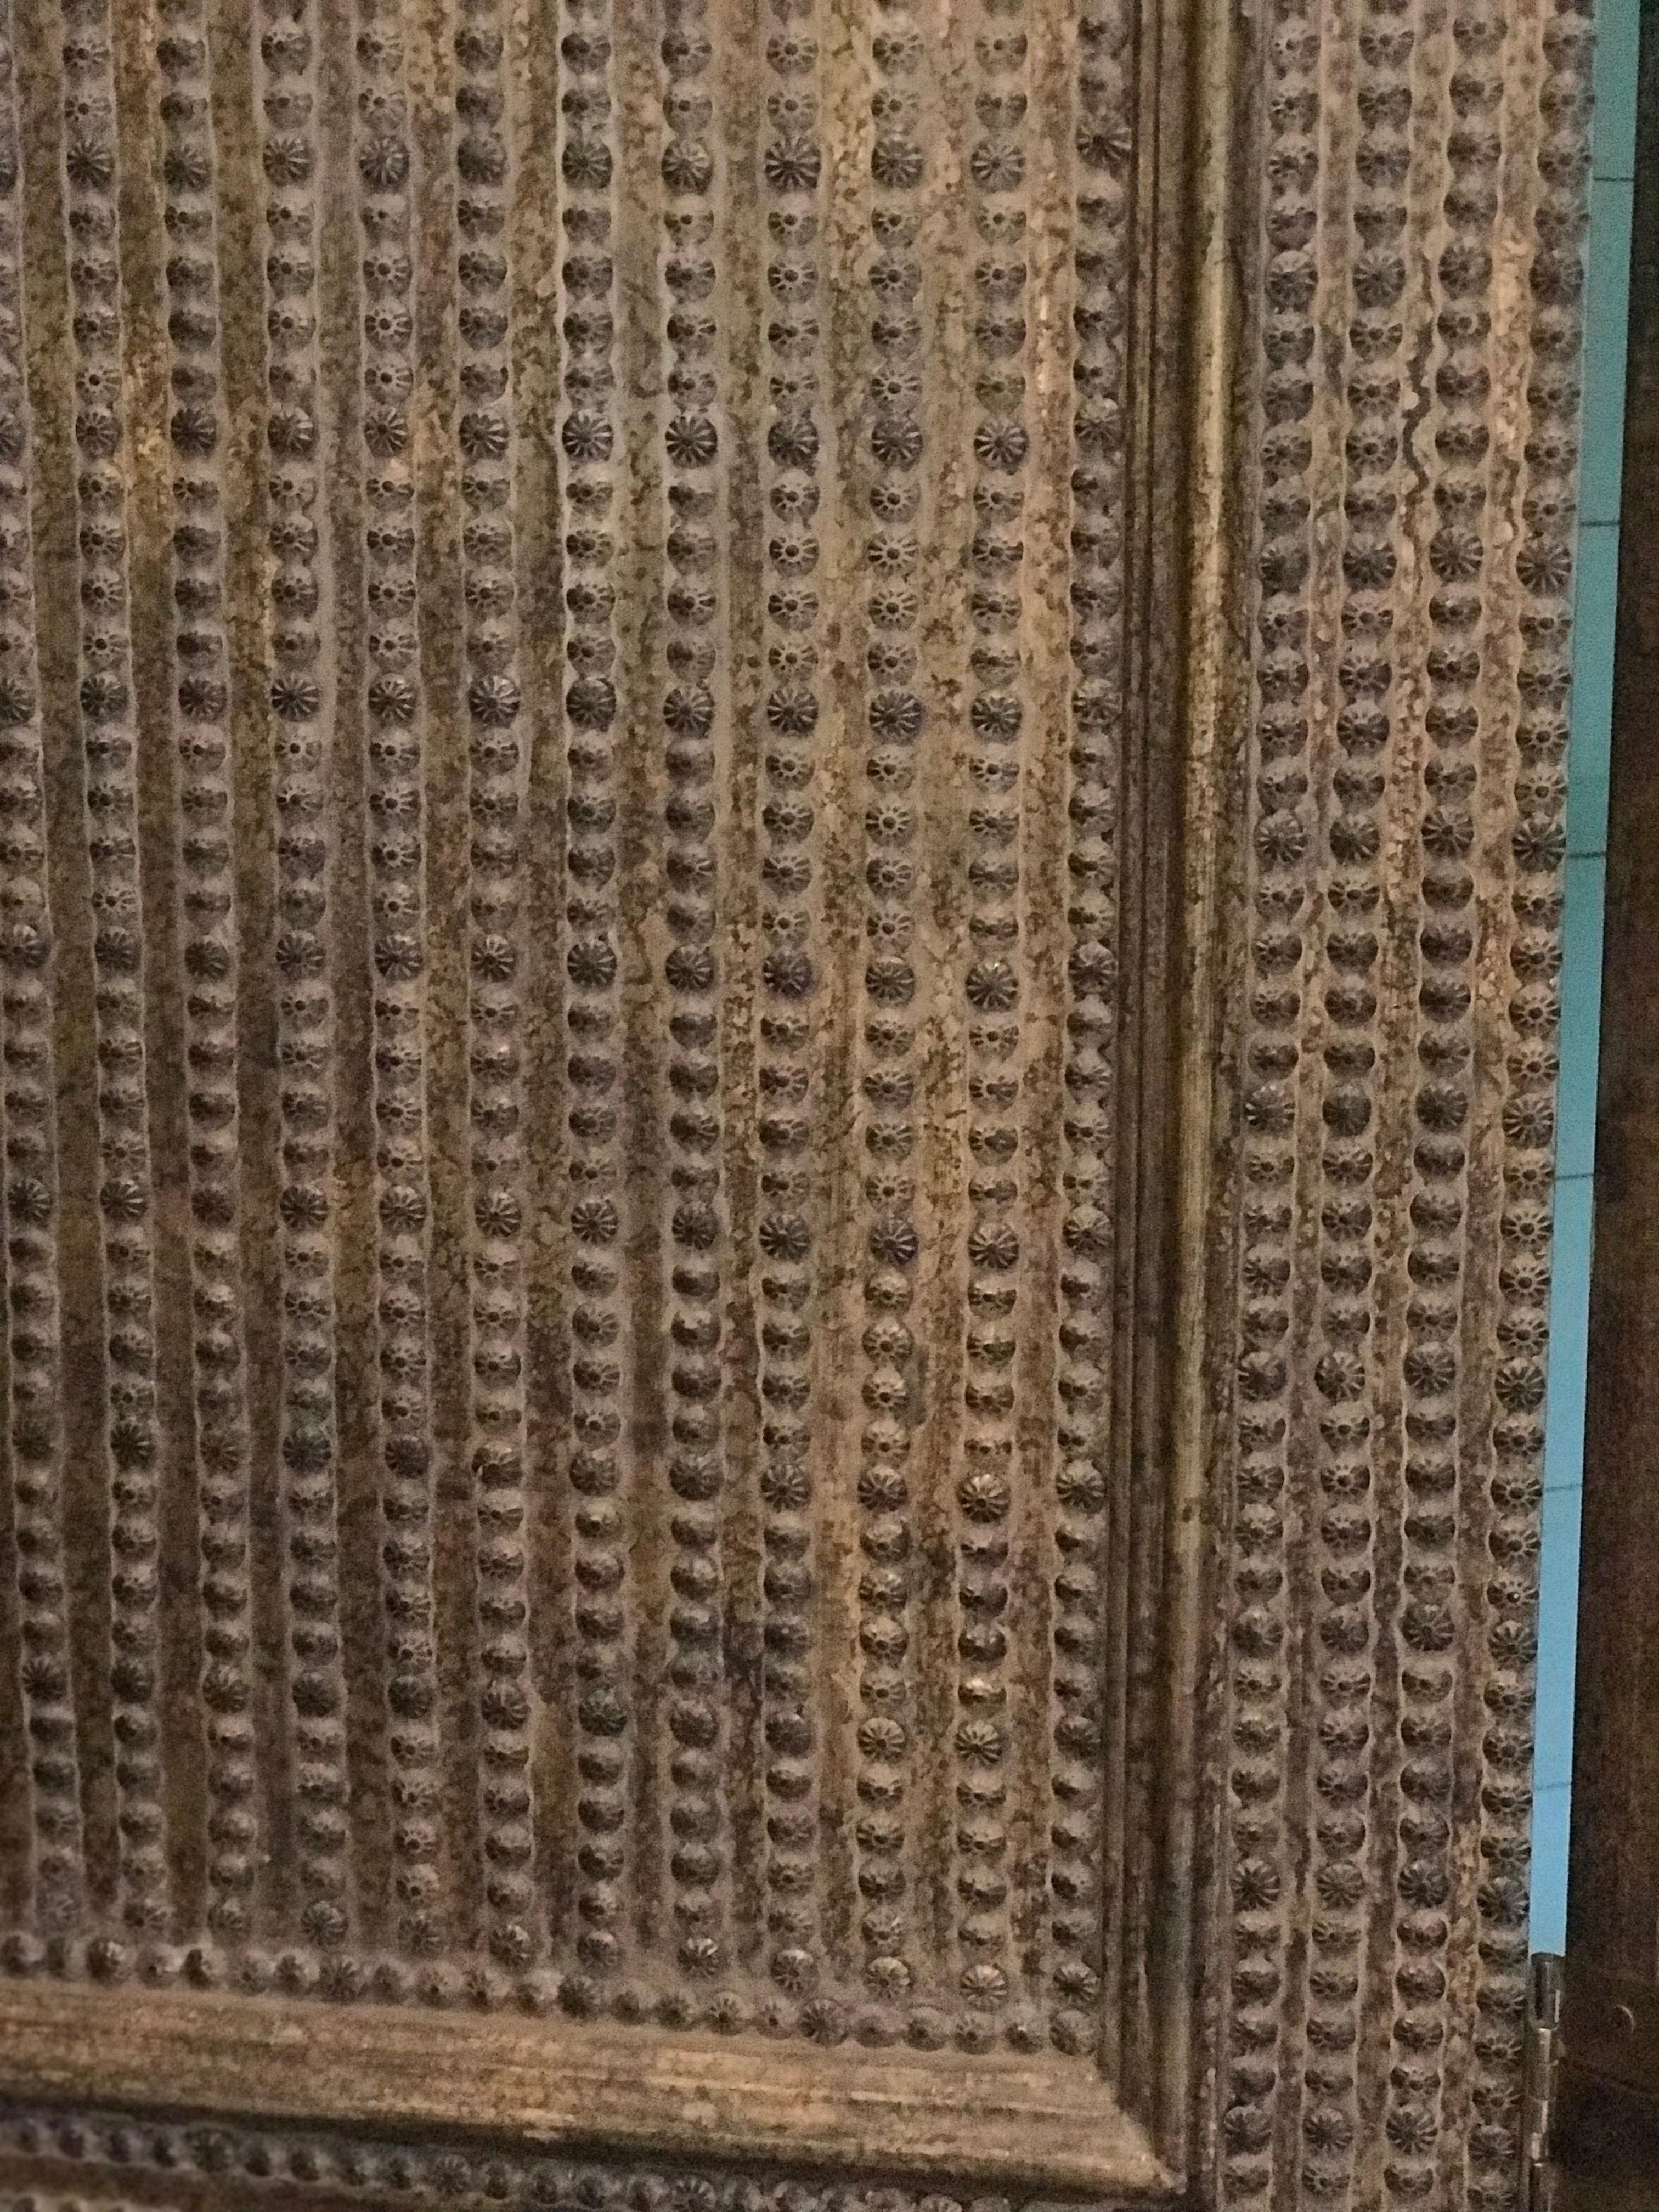 Four-panel folding screen made with brass studs. Each section is divided into two sections. The back of the screen is painted black. It is very well done and it is very heavy in weight.